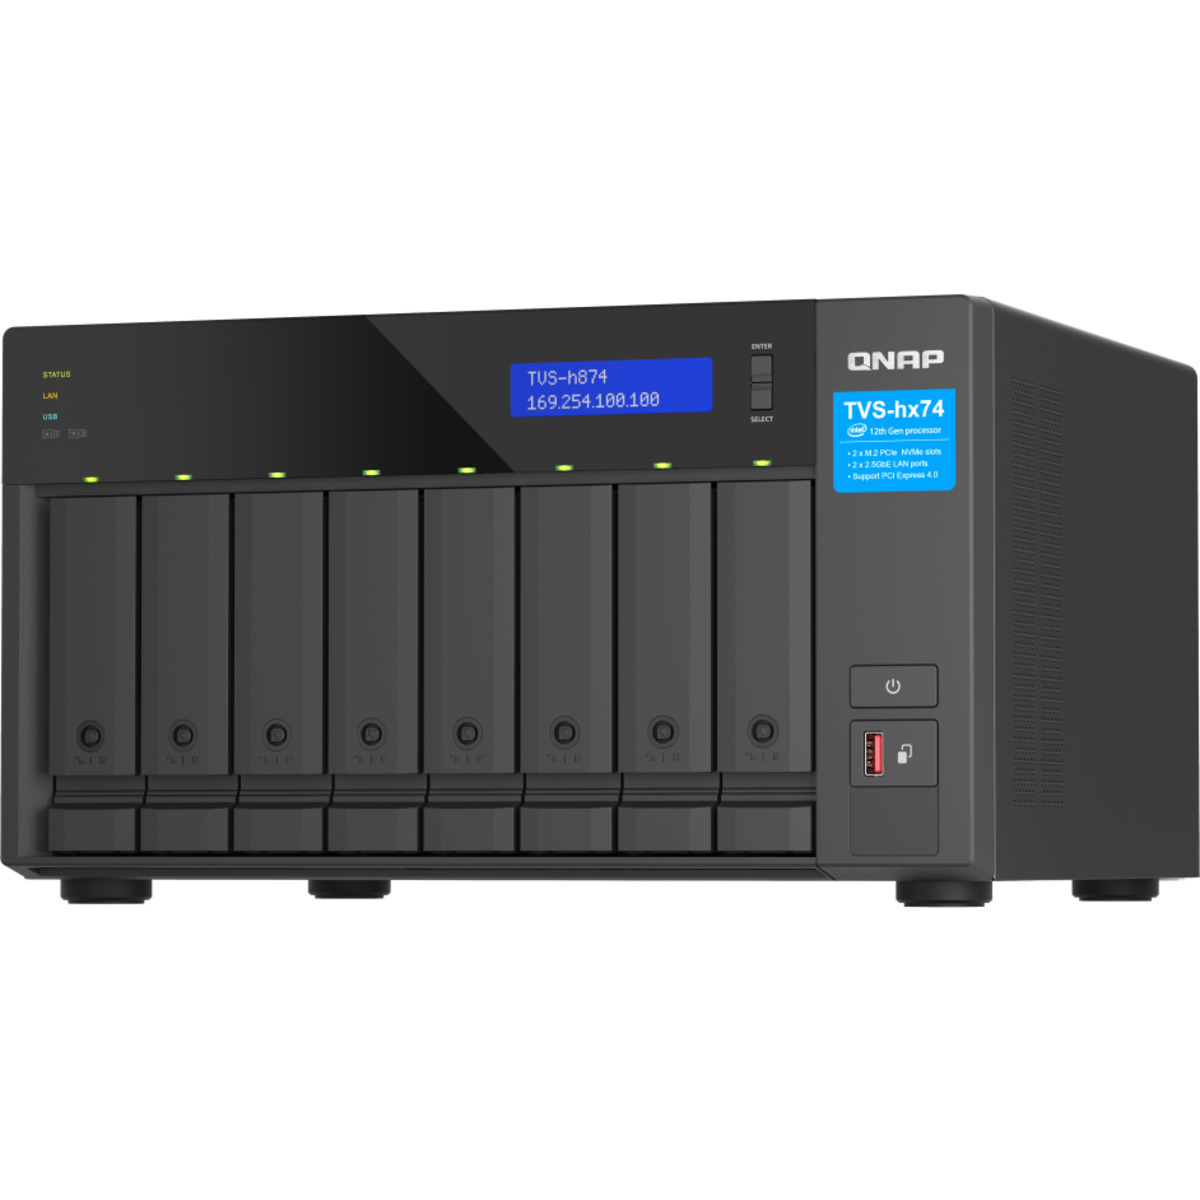 buy $4066 QNAP TVS-h874 Core i7 16tb Desktop NAS - Network Attached Storage Device 8x2000gb Seagate IronWolf Pro ST2000NT001 3.5 7200rpm SATA 6Gb/s HDD NAS Class Drives Installed - Burn-In Tested - nas headquarters buy network attached storage server device das new raid-5 free shipping simply usa TVS-h874 Core i7